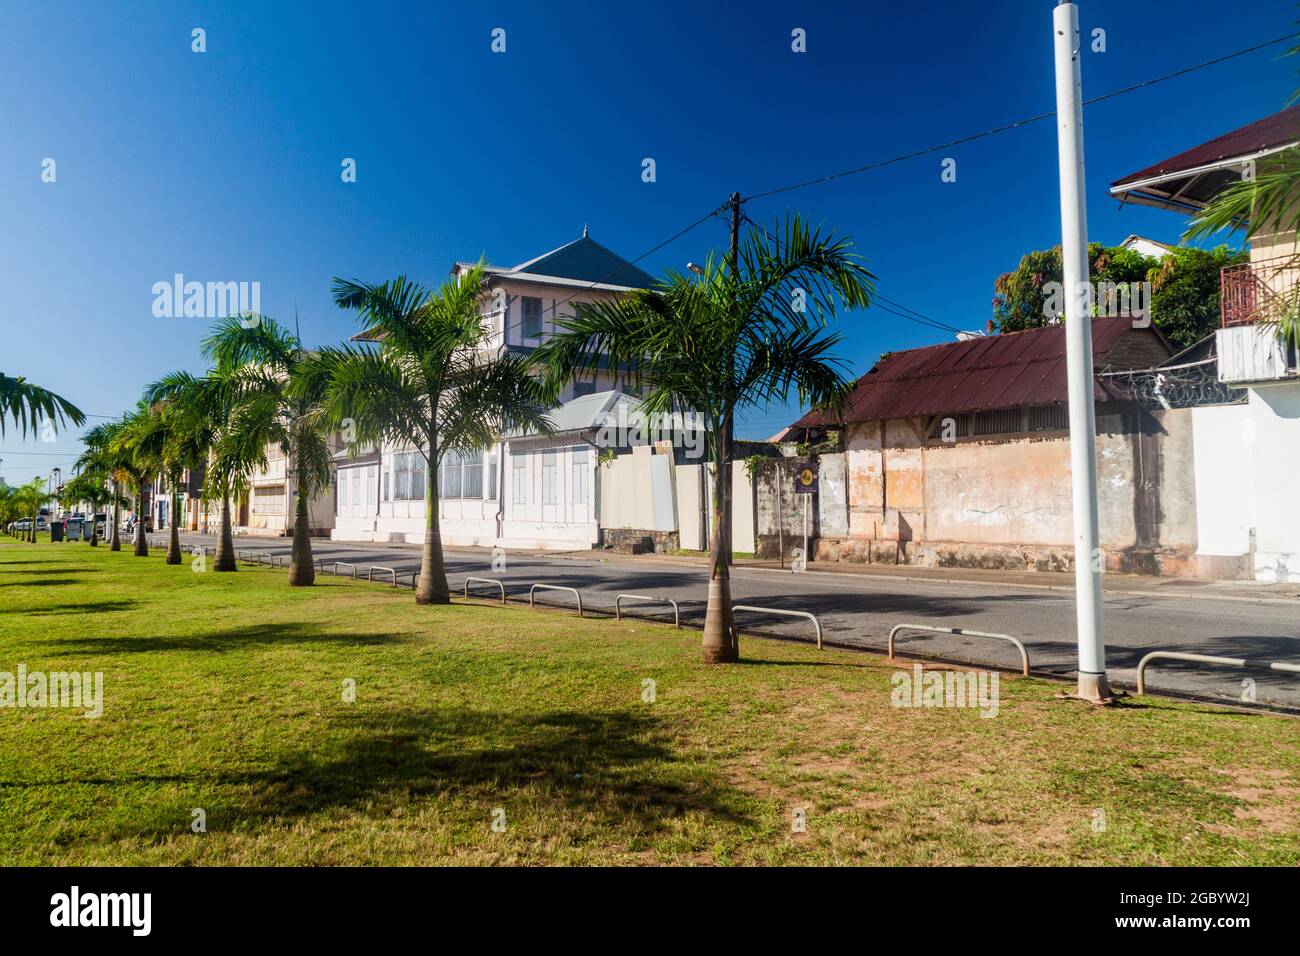 Place des Palmistes square in Cayenne, capital of French Guiana. Stock Photo